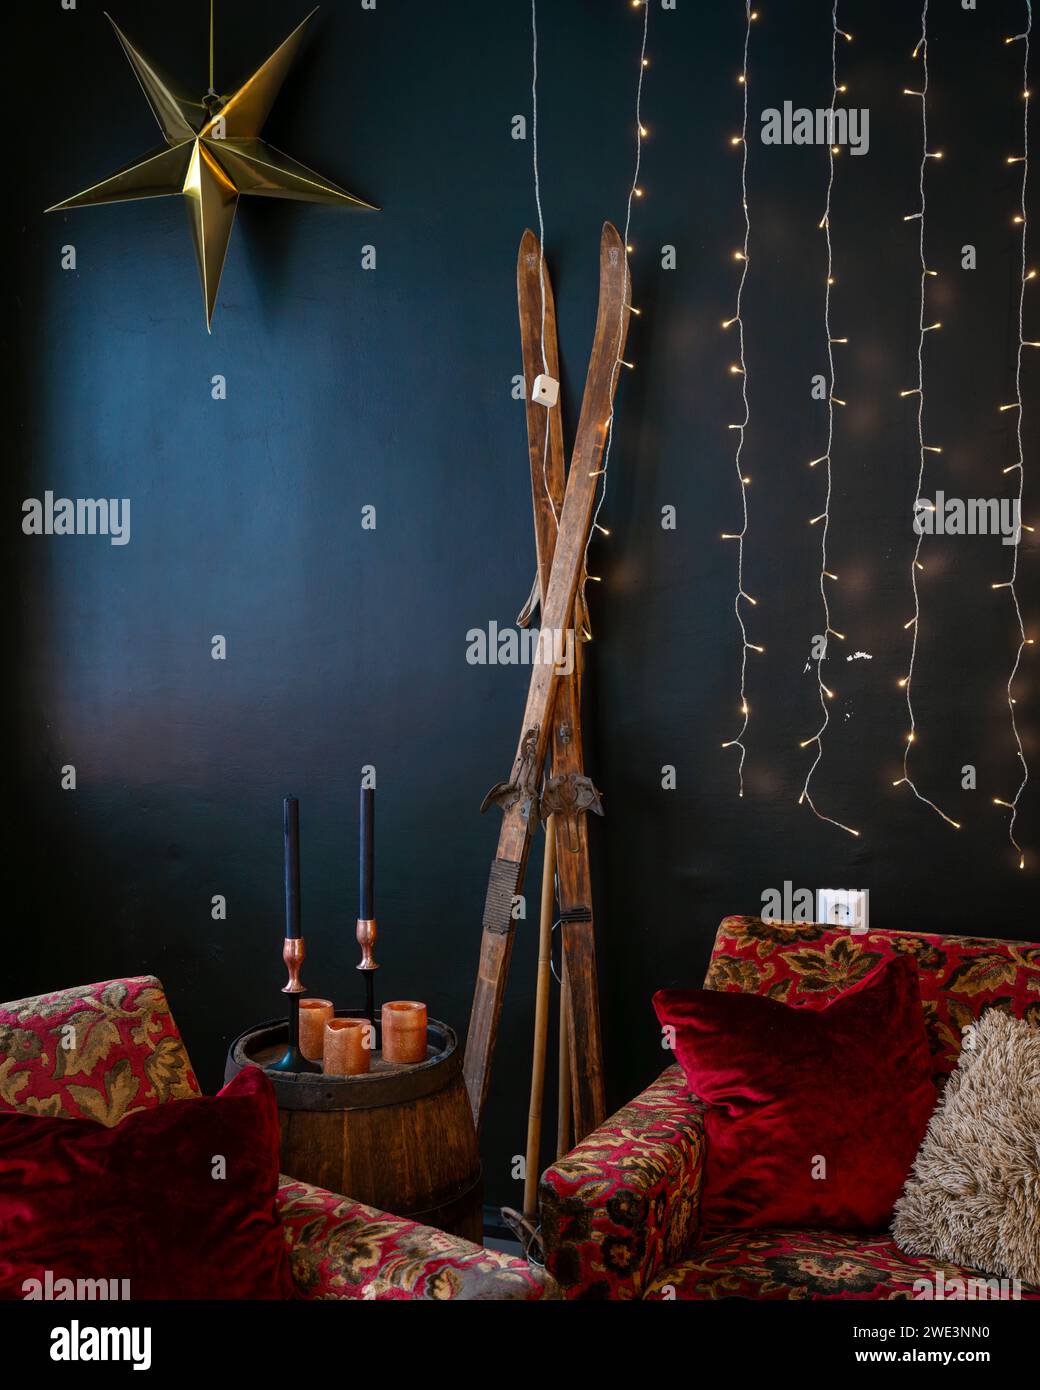 Interior with wooden barrel, old skis, candle with candle stick, decoration. Interior design of christmas. Stock Photo